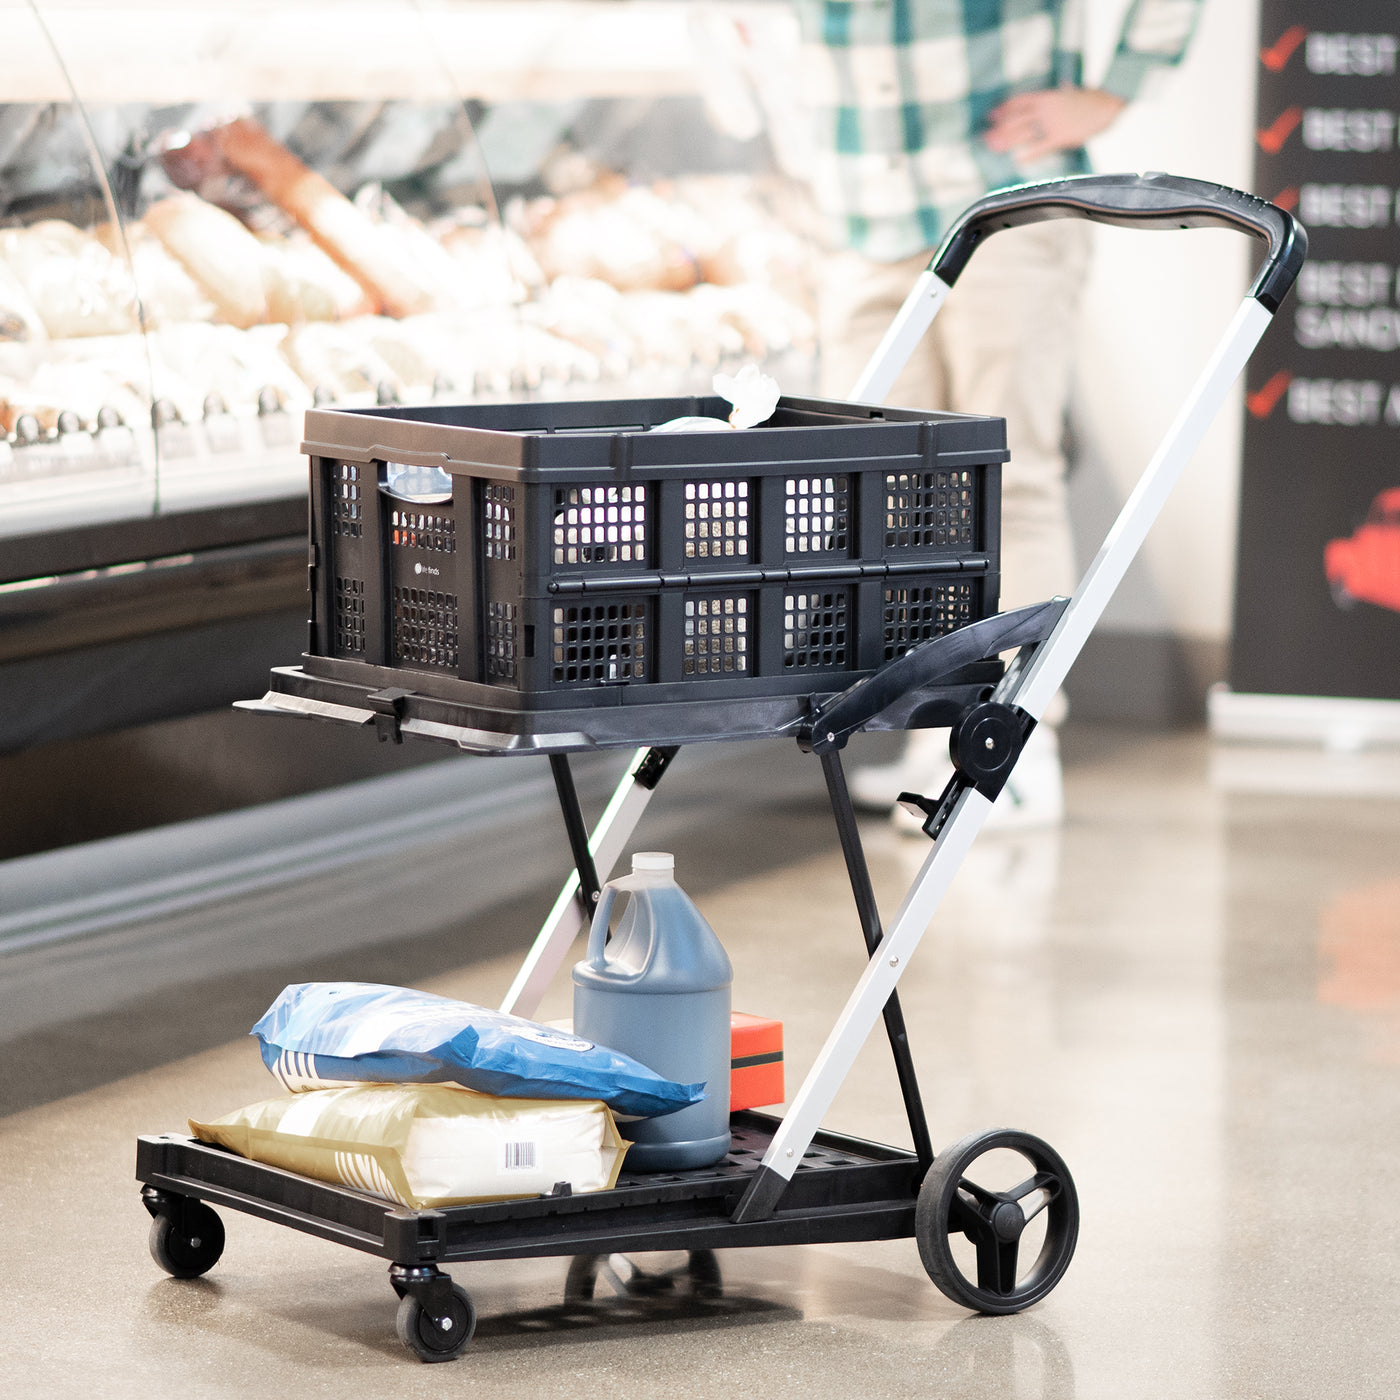 Convenient mobile collapsible shopping cart.